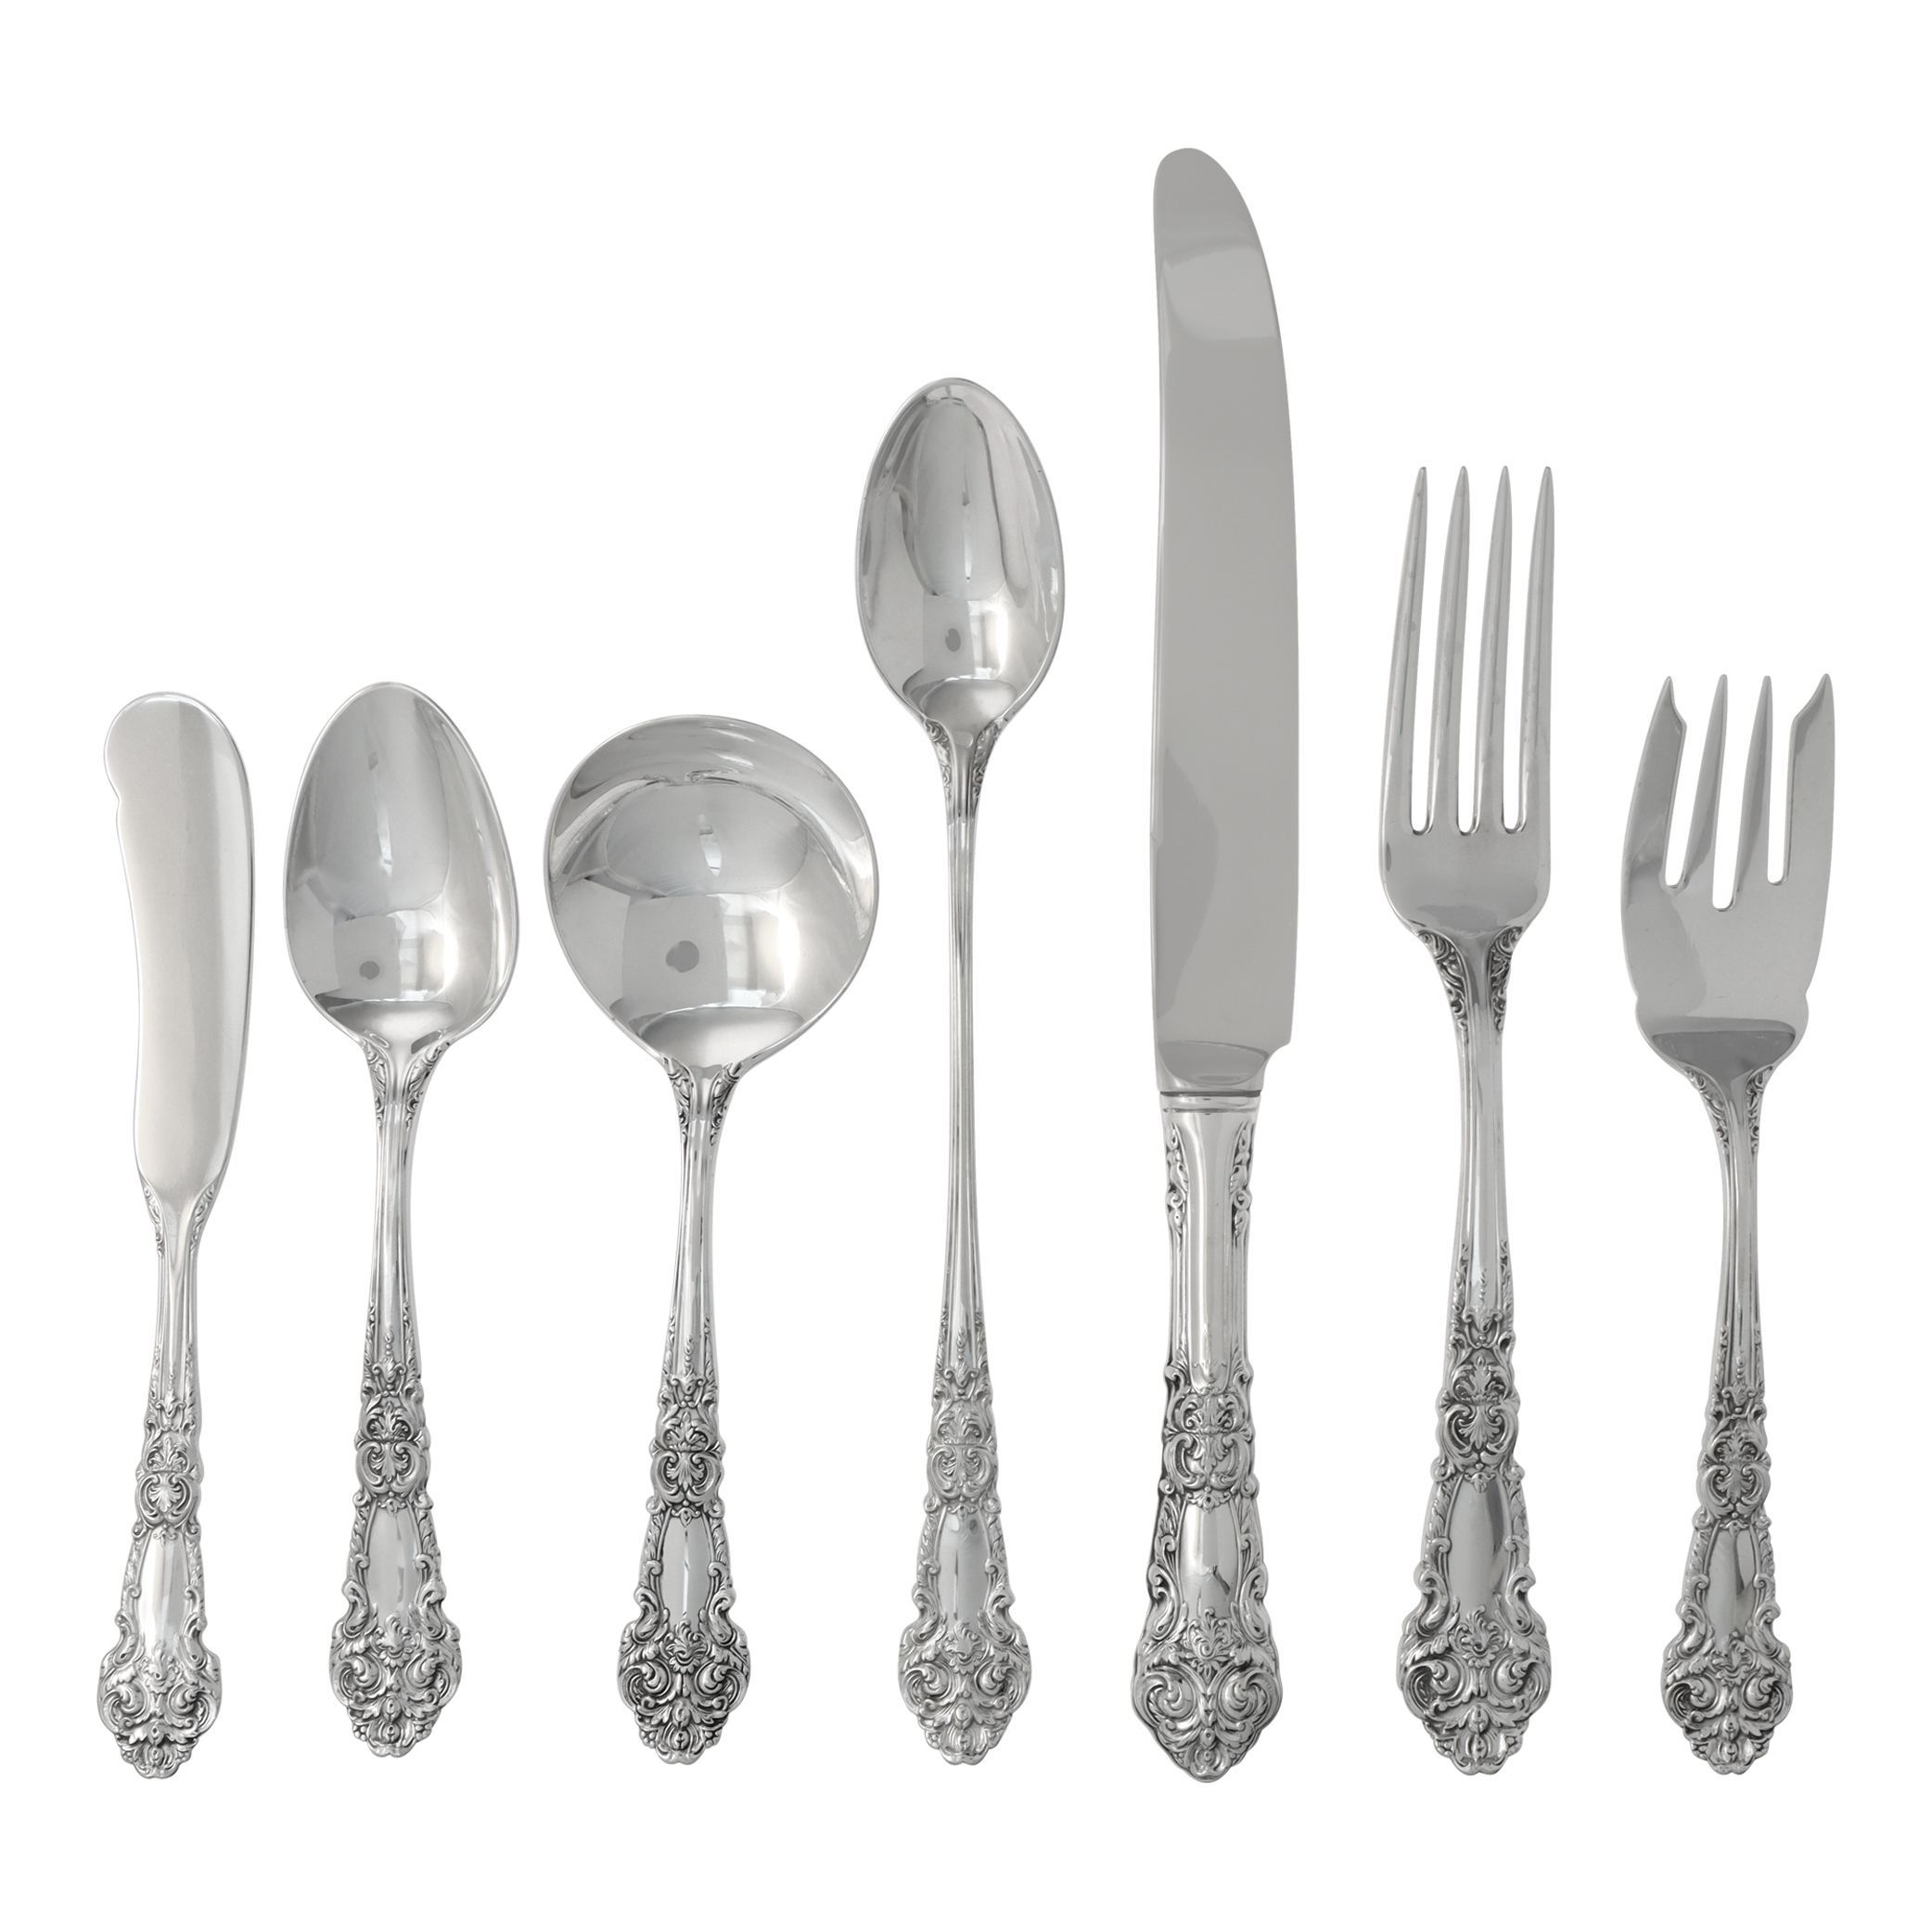 "FRENCH RENAISSANCE" sterling silver flatware set patented in 1941 by Reed & Barton- 5 place setting for 12 + 8 serving pieces- Over 76 Oz troy sterling silver.